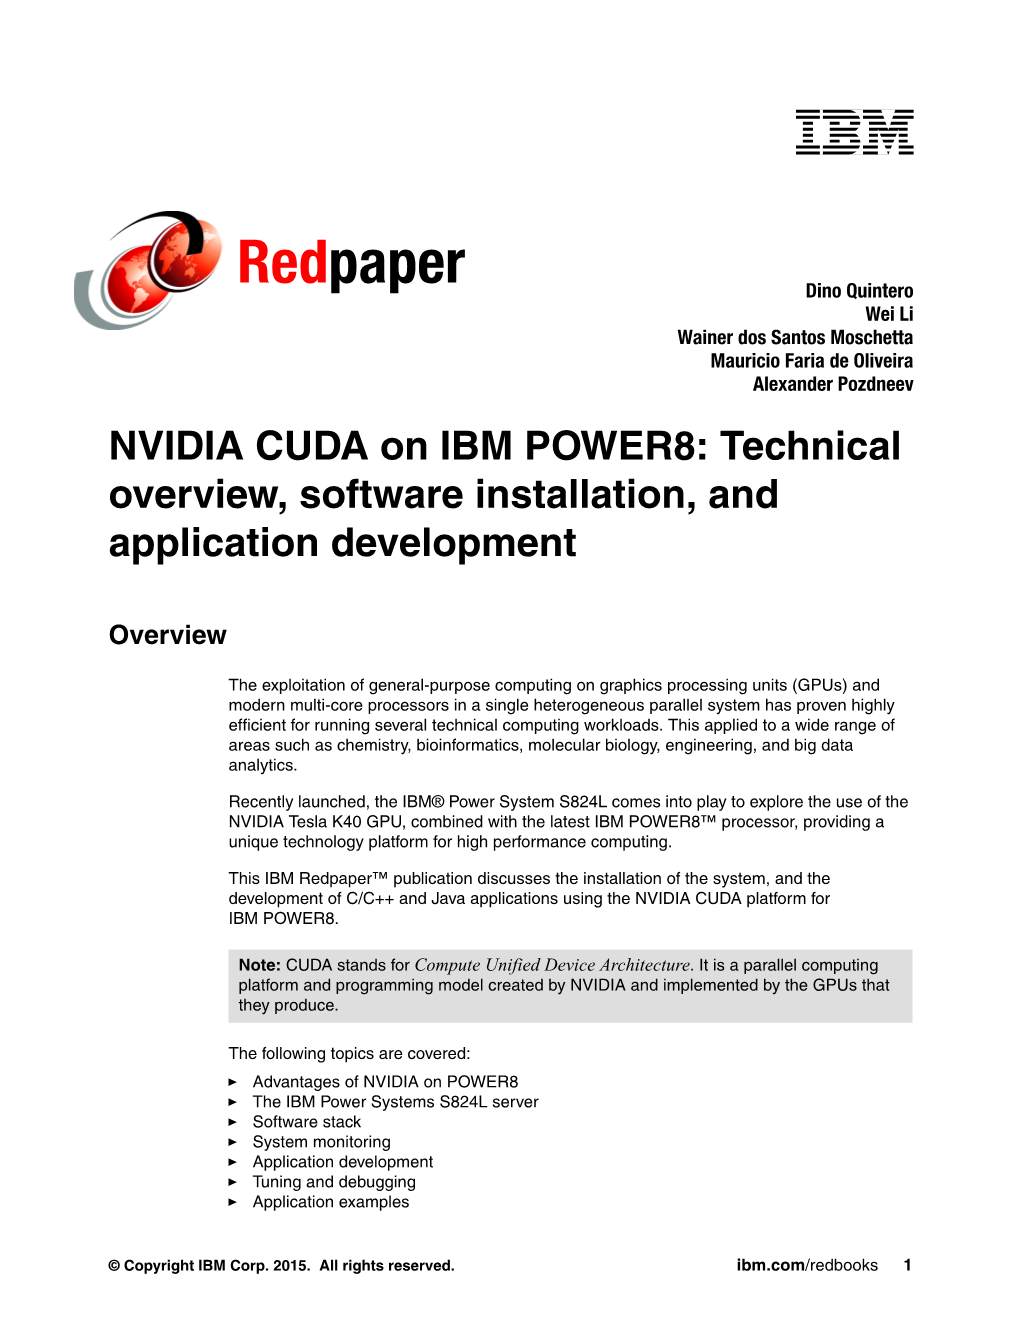 NVIDIA CUDA on IBM POWER8: Technical Overview, Software Installation, and Application Development